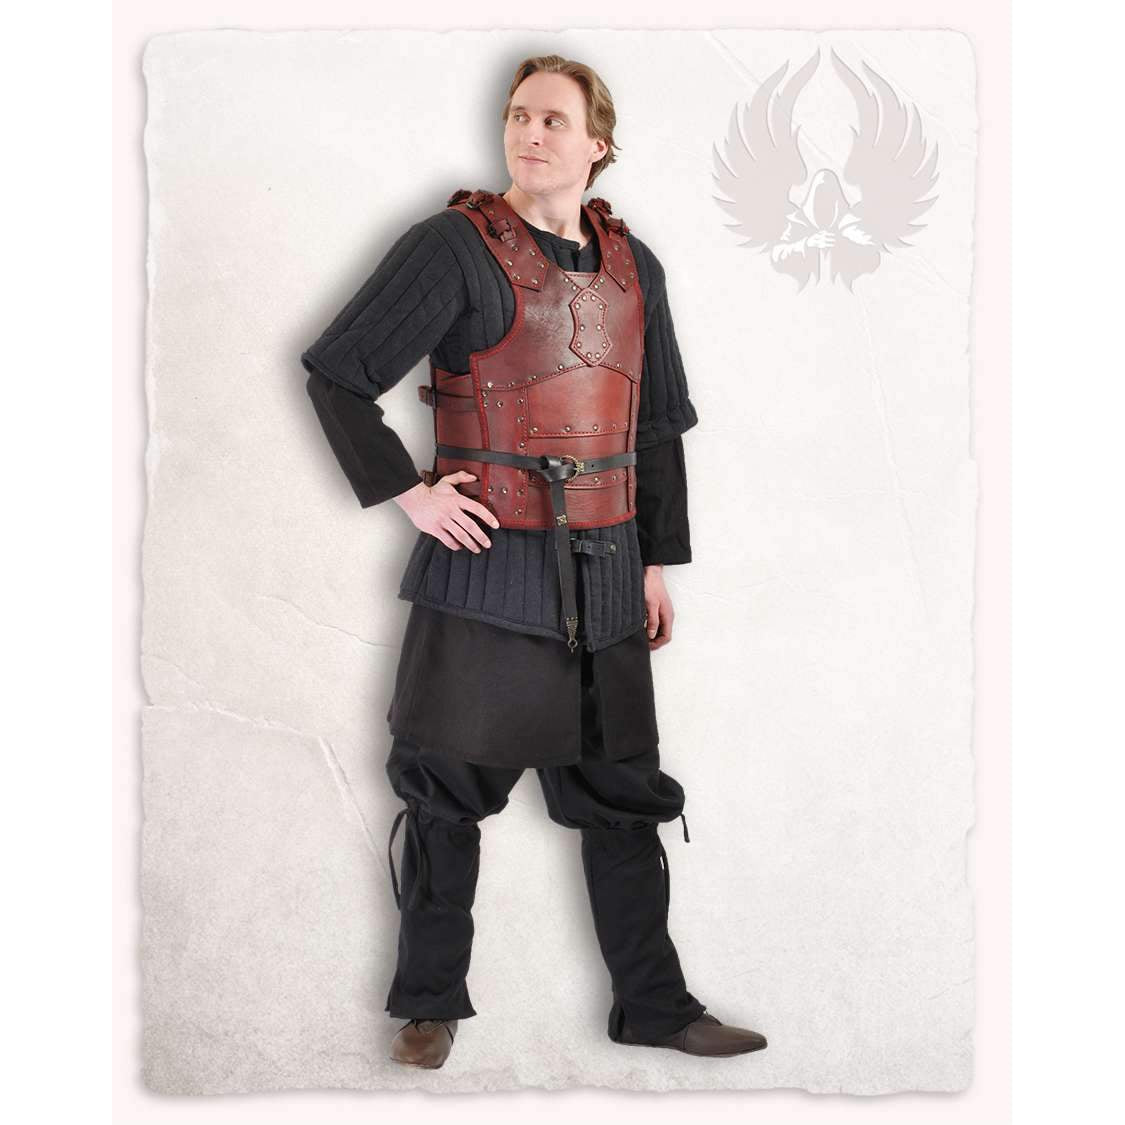 Studded Leather Armor Perfect for LARP, Cosplay & Collectors Handmade With  Best Materials Ecologically Tanned 